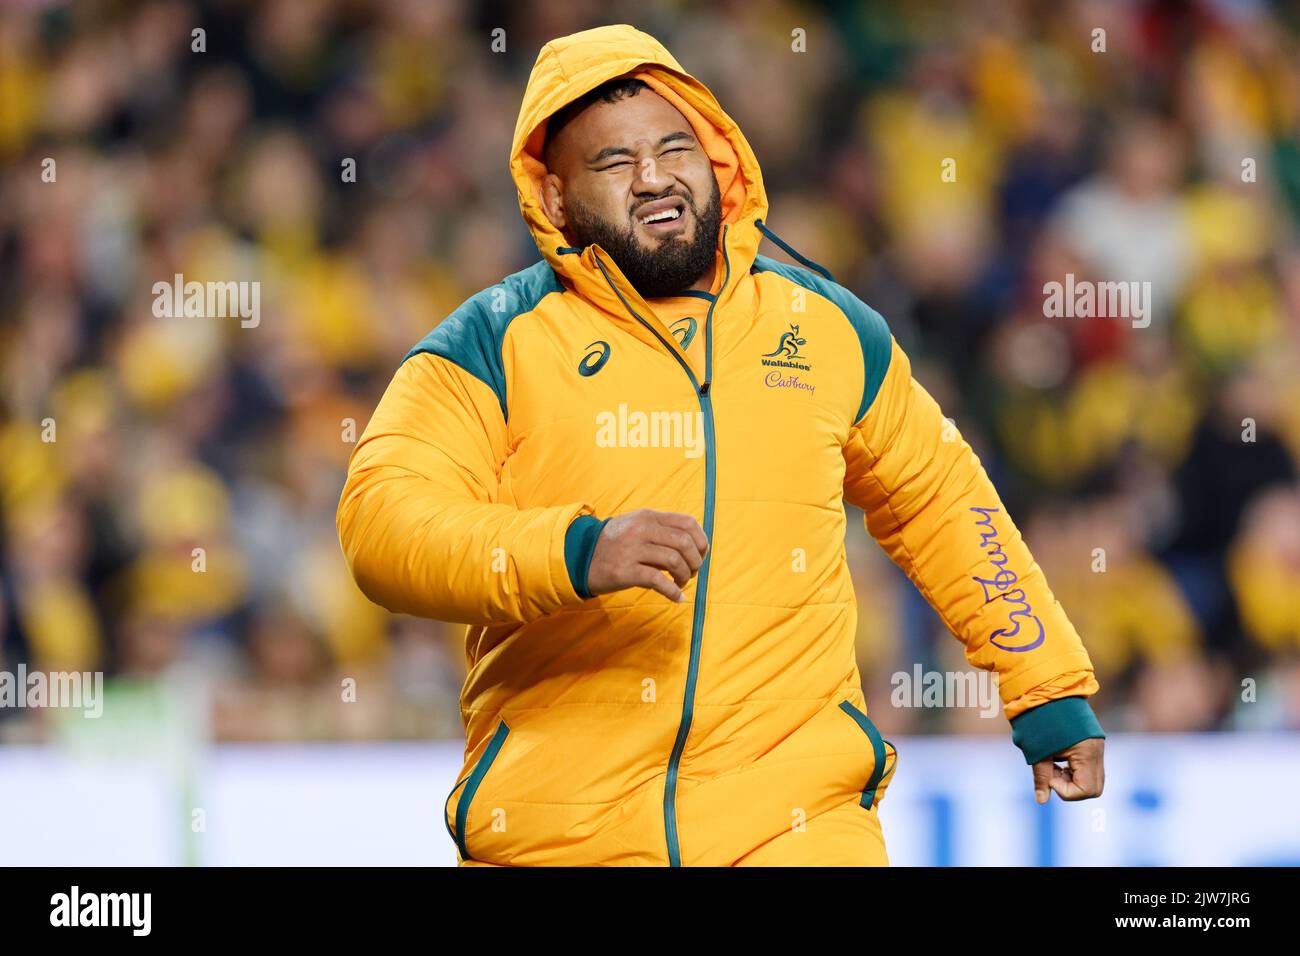 SYDNEY, AUSTRALIA - SEPTEMBER 3: Taniela Tupou of Australia warms up during The Rugby Championship match between the Australia Wallabies and South Afr Stock Photo